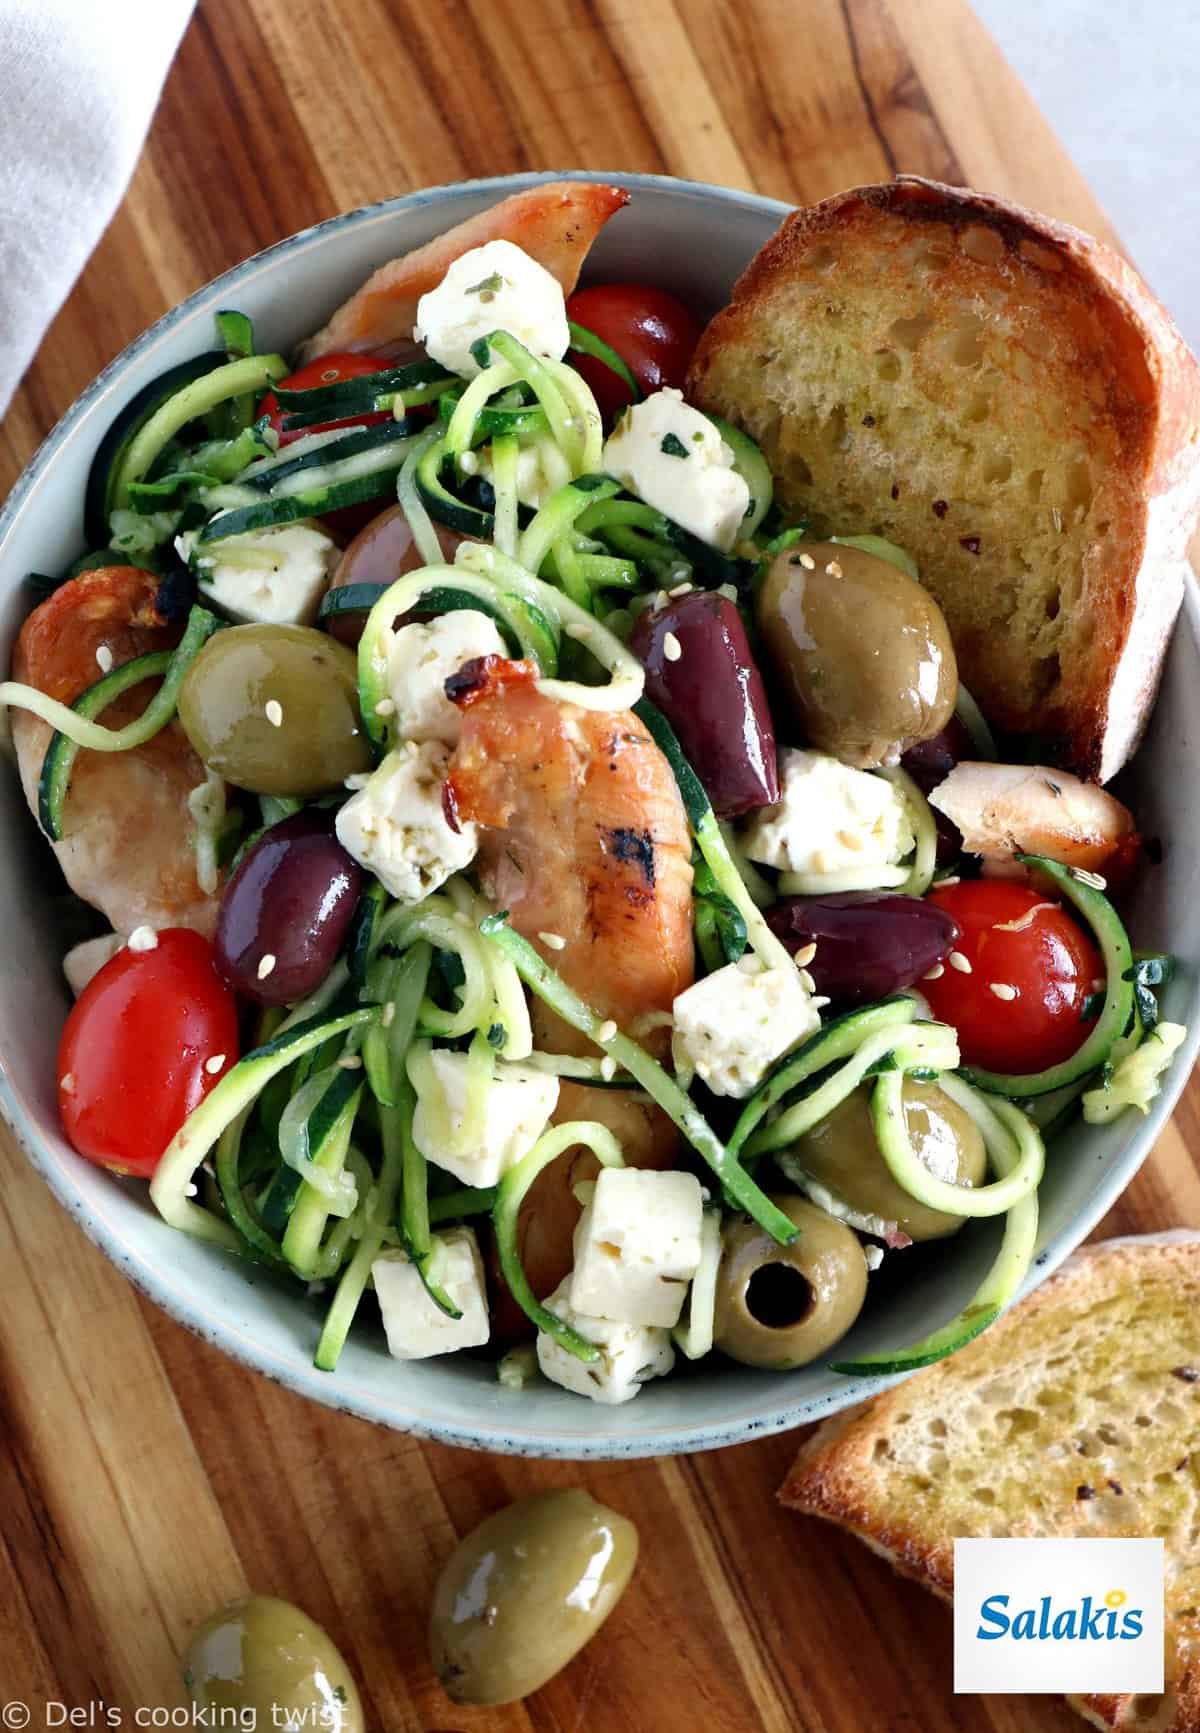 This delicious Greek chicken salad with zoodles (zucchini noodles), feta and olives makes a wonderful summer meal.